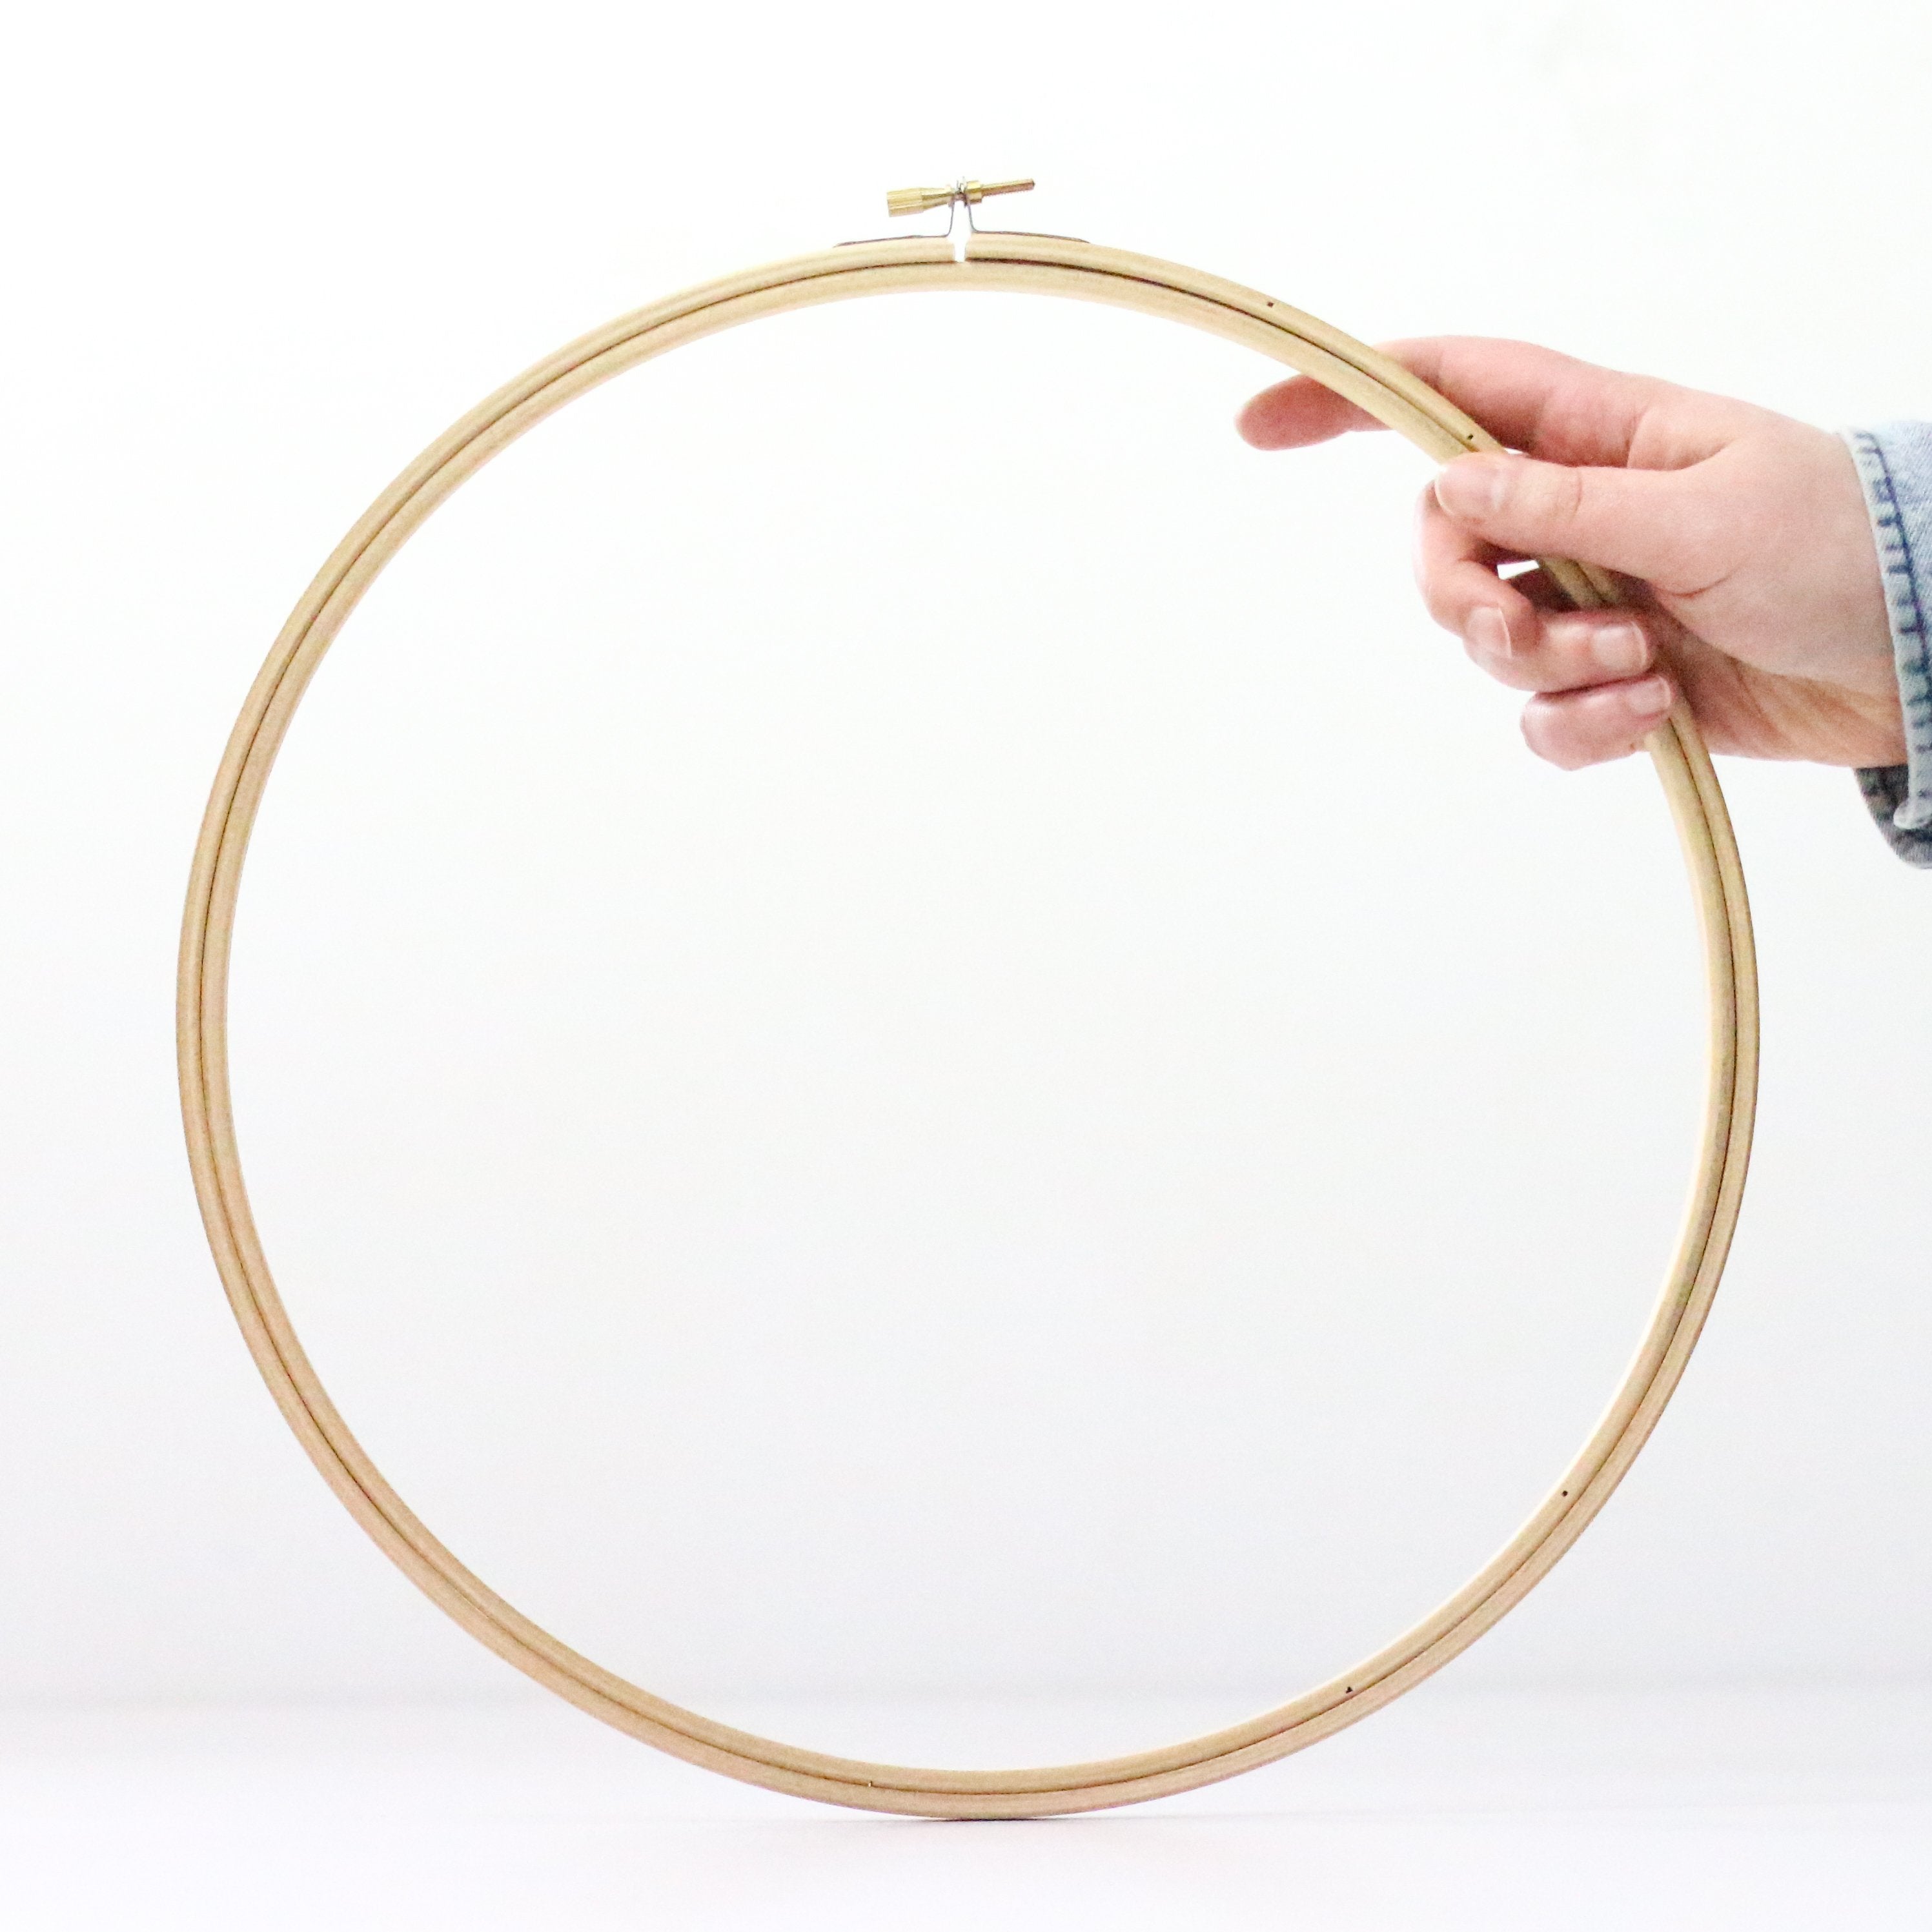 Embroiderymaterial 12 Inch Round Wooden Embroidery Hoop Price in India -  Buy Embroiderymaterial 12 Inch Round Wooden Embroidery Hoop online at